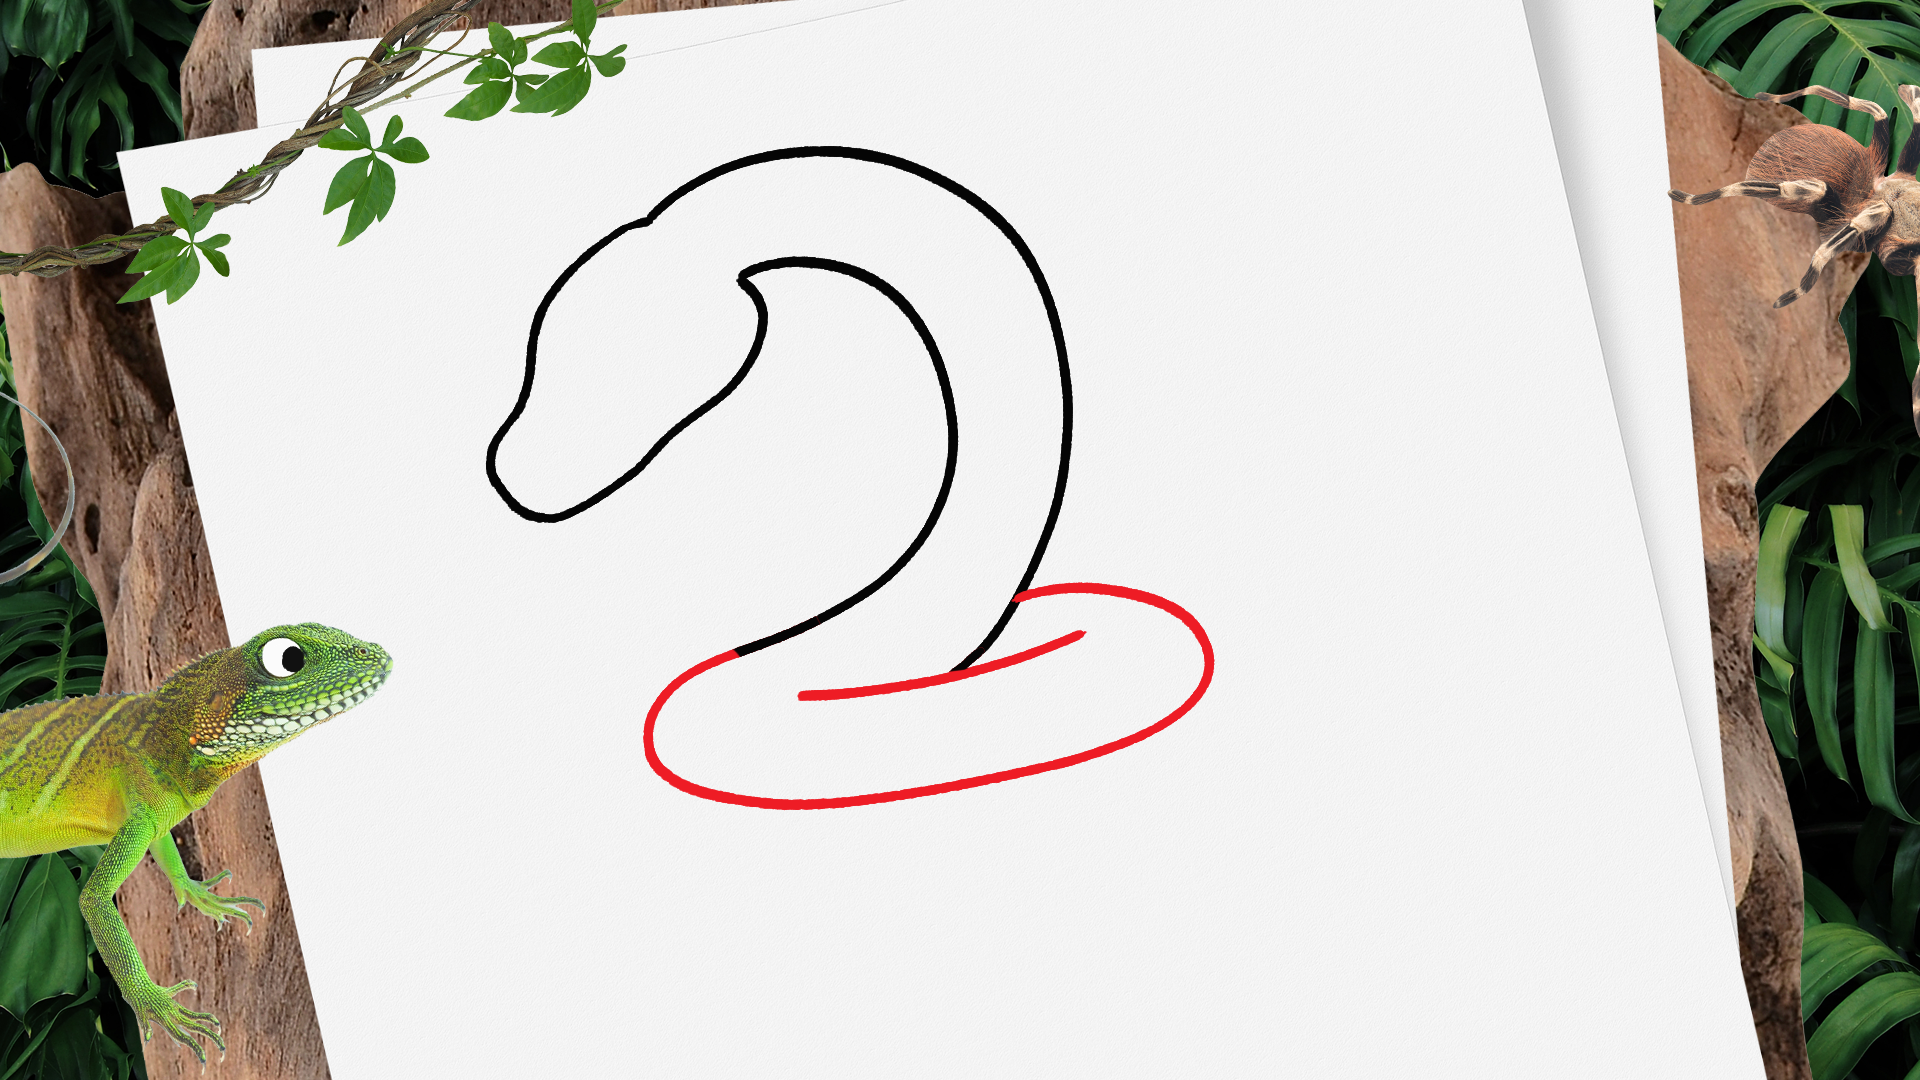 How to Draw a Snake - A Fun and Easy Snake Drawing